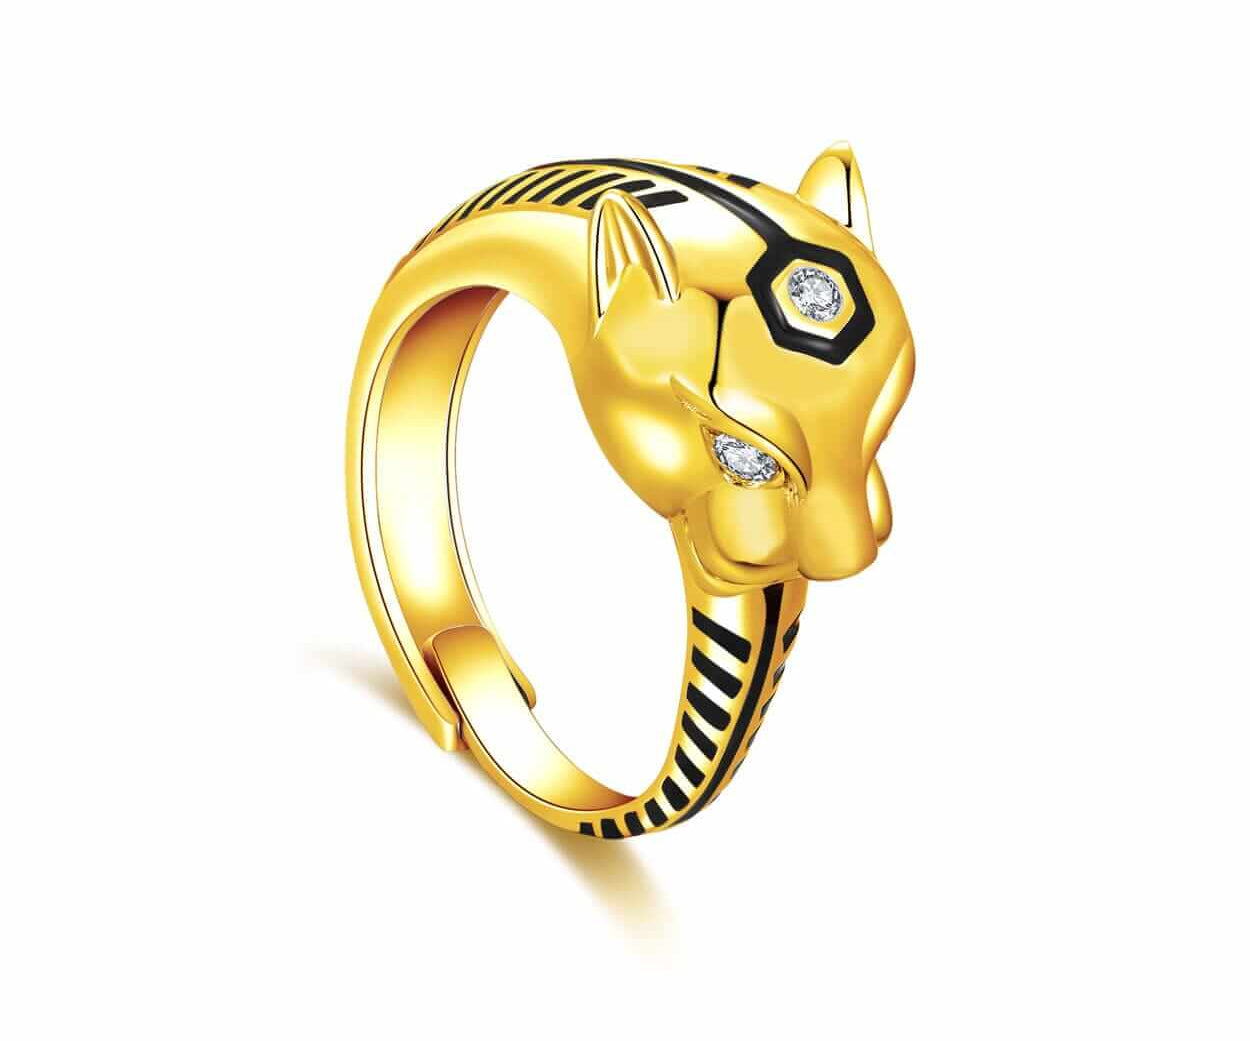 Gold Panther RingsHandcrafted Fine Jewelry